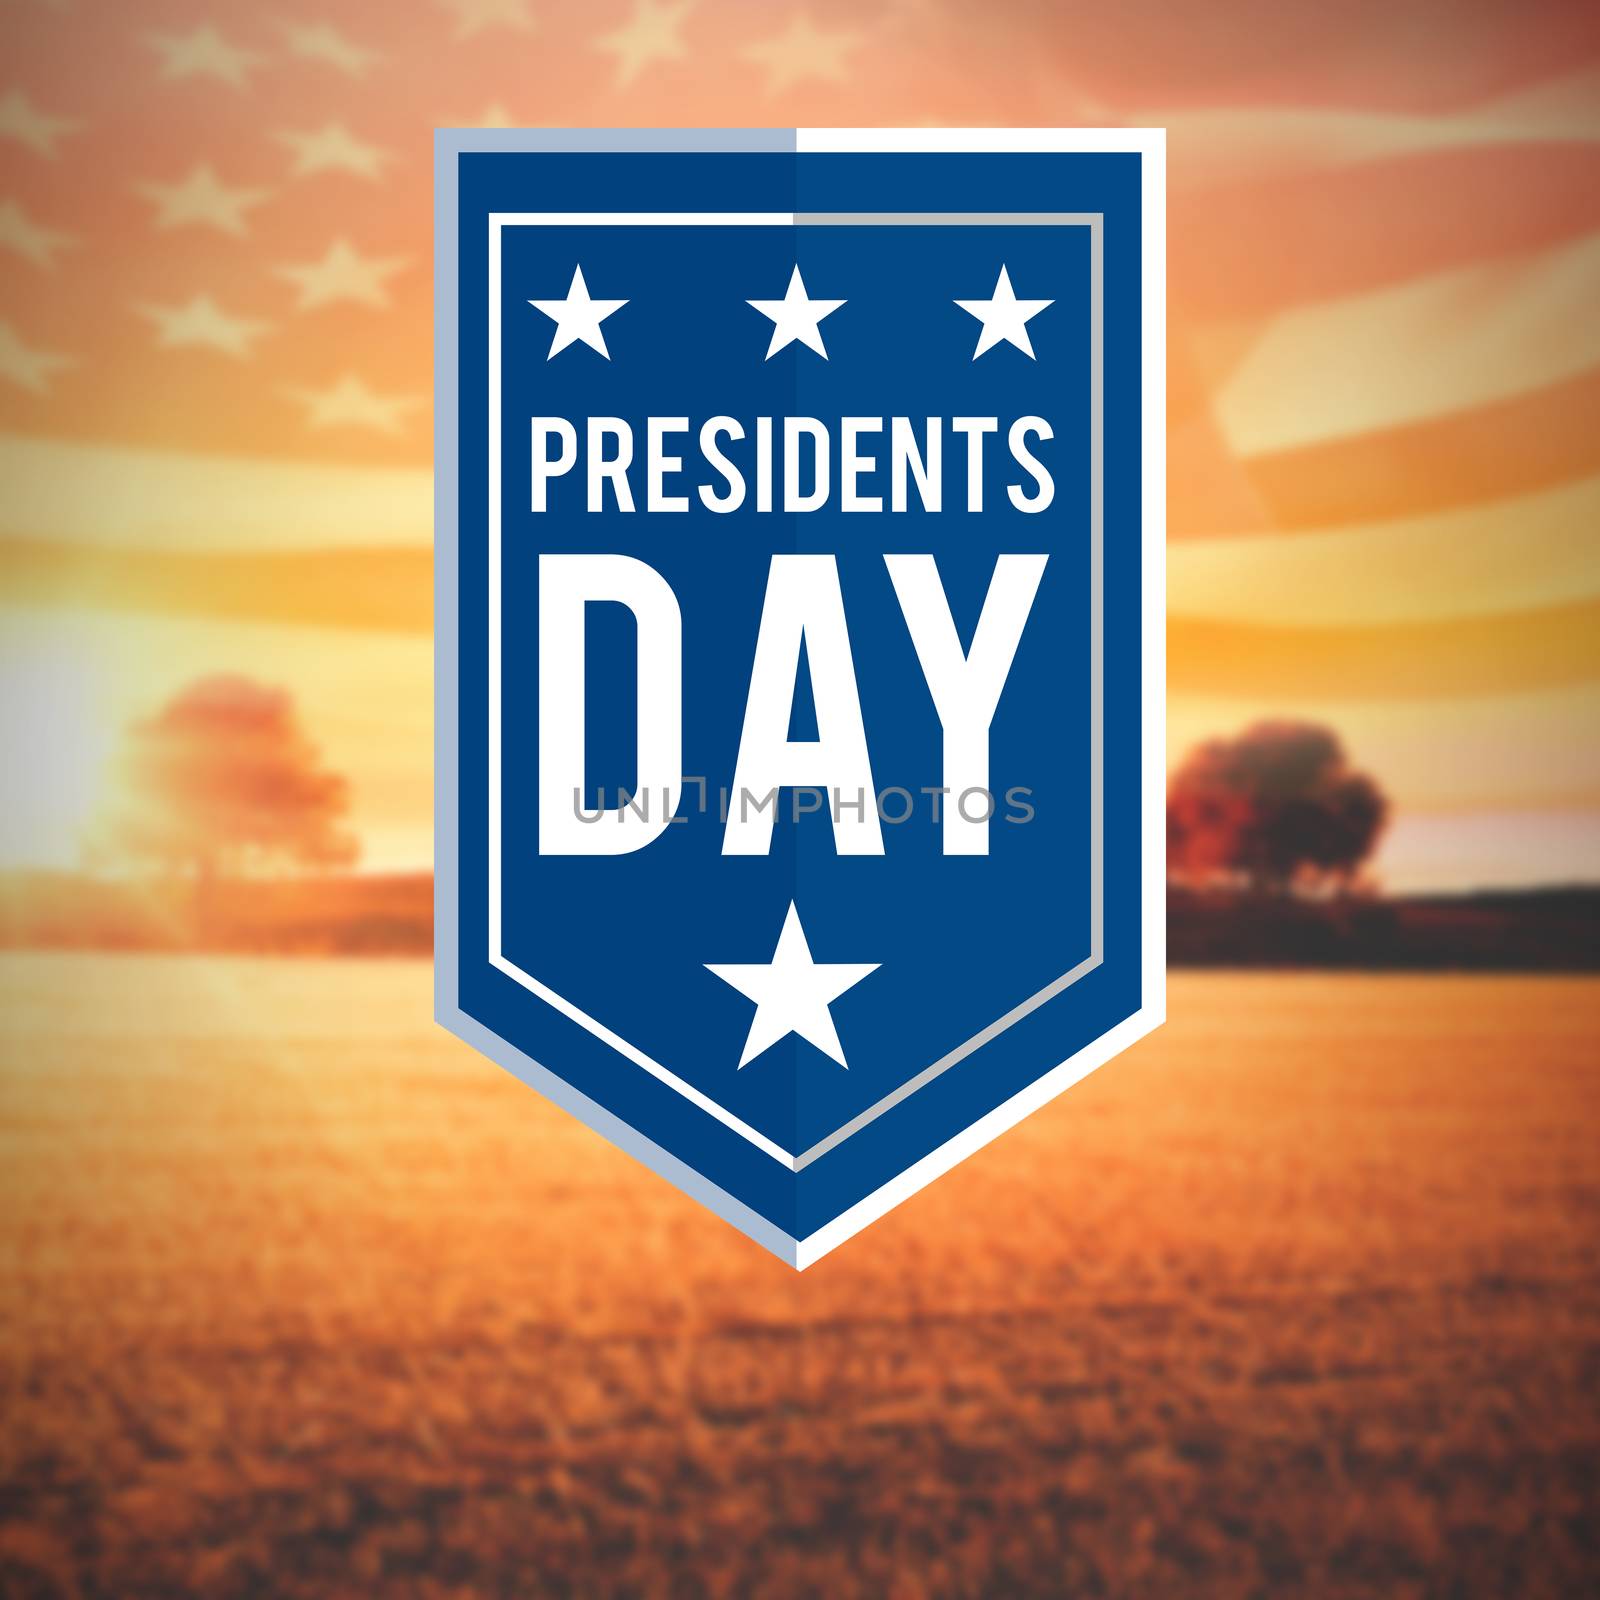 Composite image of presidents day icon by Wavebreakmedia